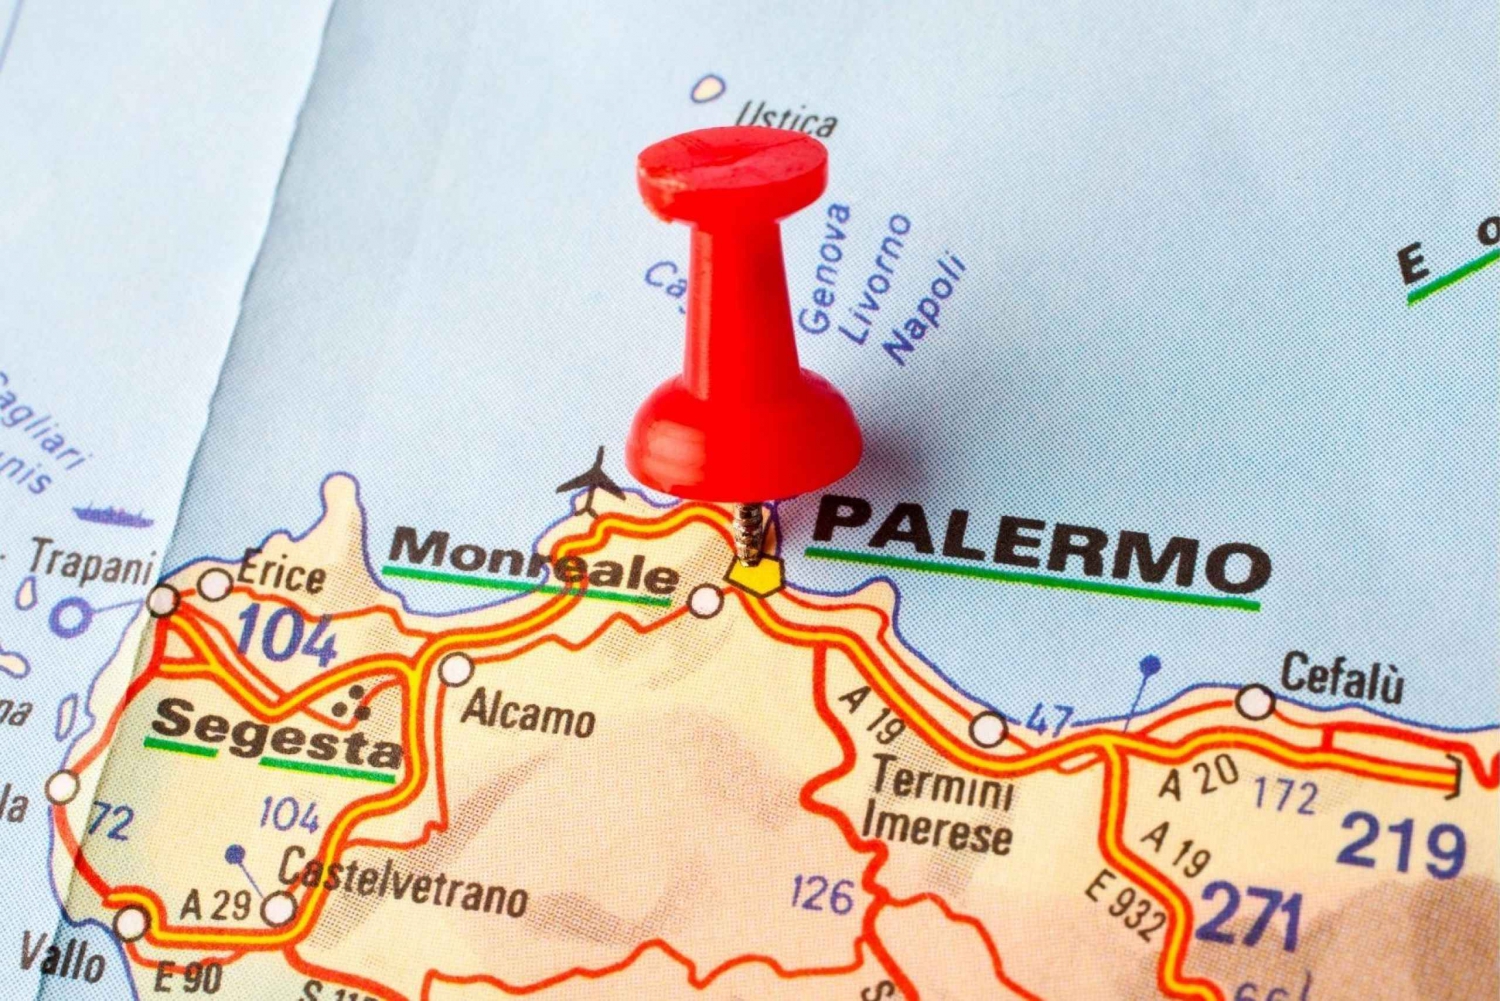 From Taormina to Palermo: stop in Cefalù